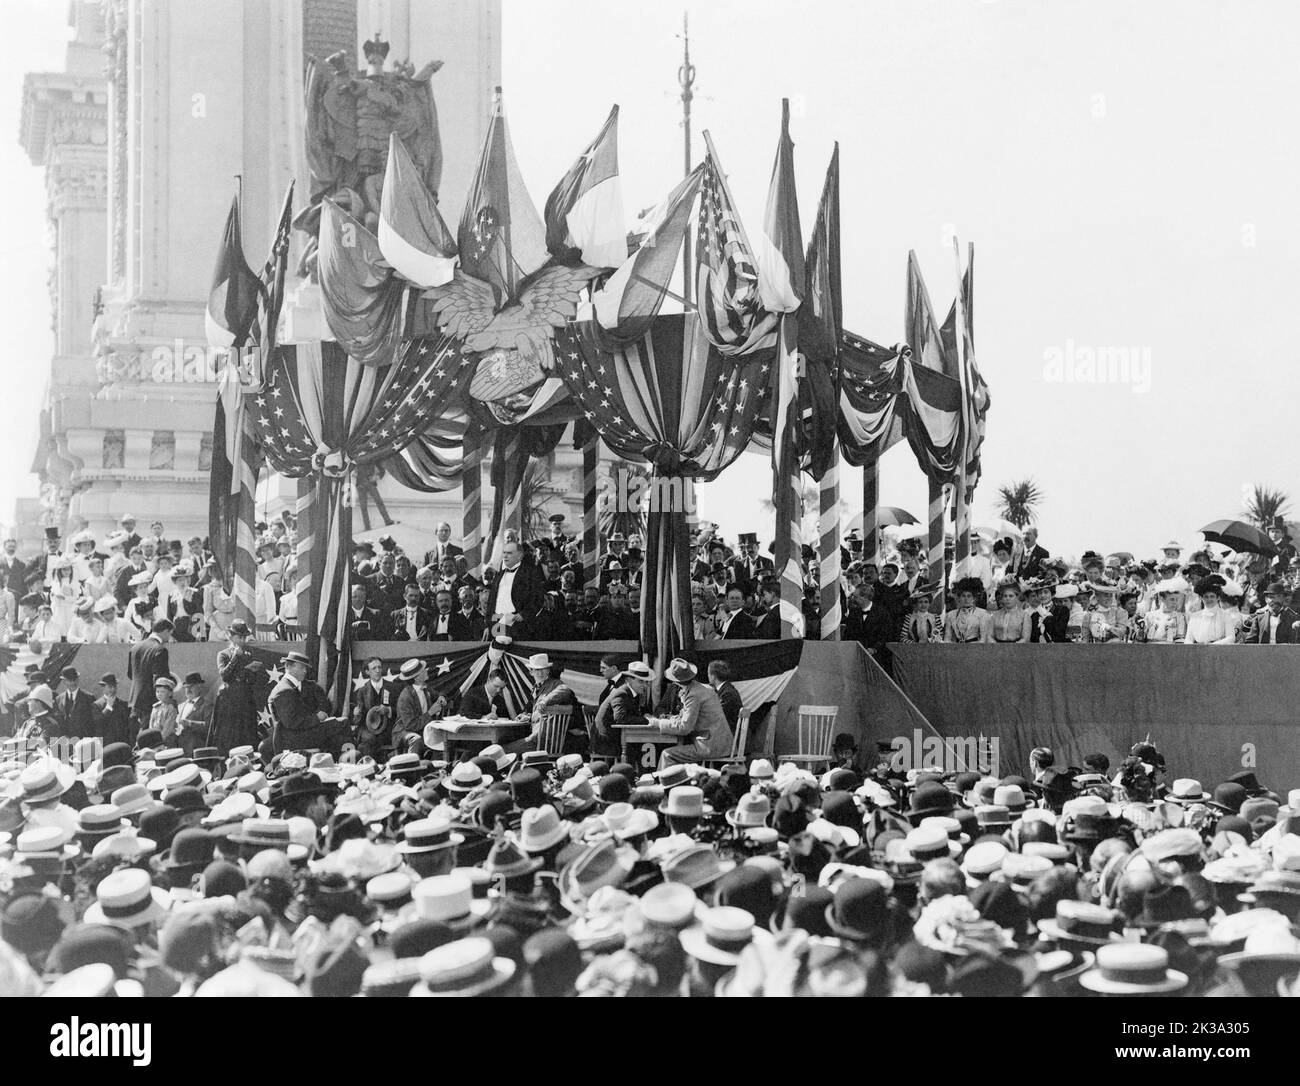 William McKinley (to the left of center, with white shirtfront) delivers his final speech in Ohio just before his assassination in September 1901 Stock Photo